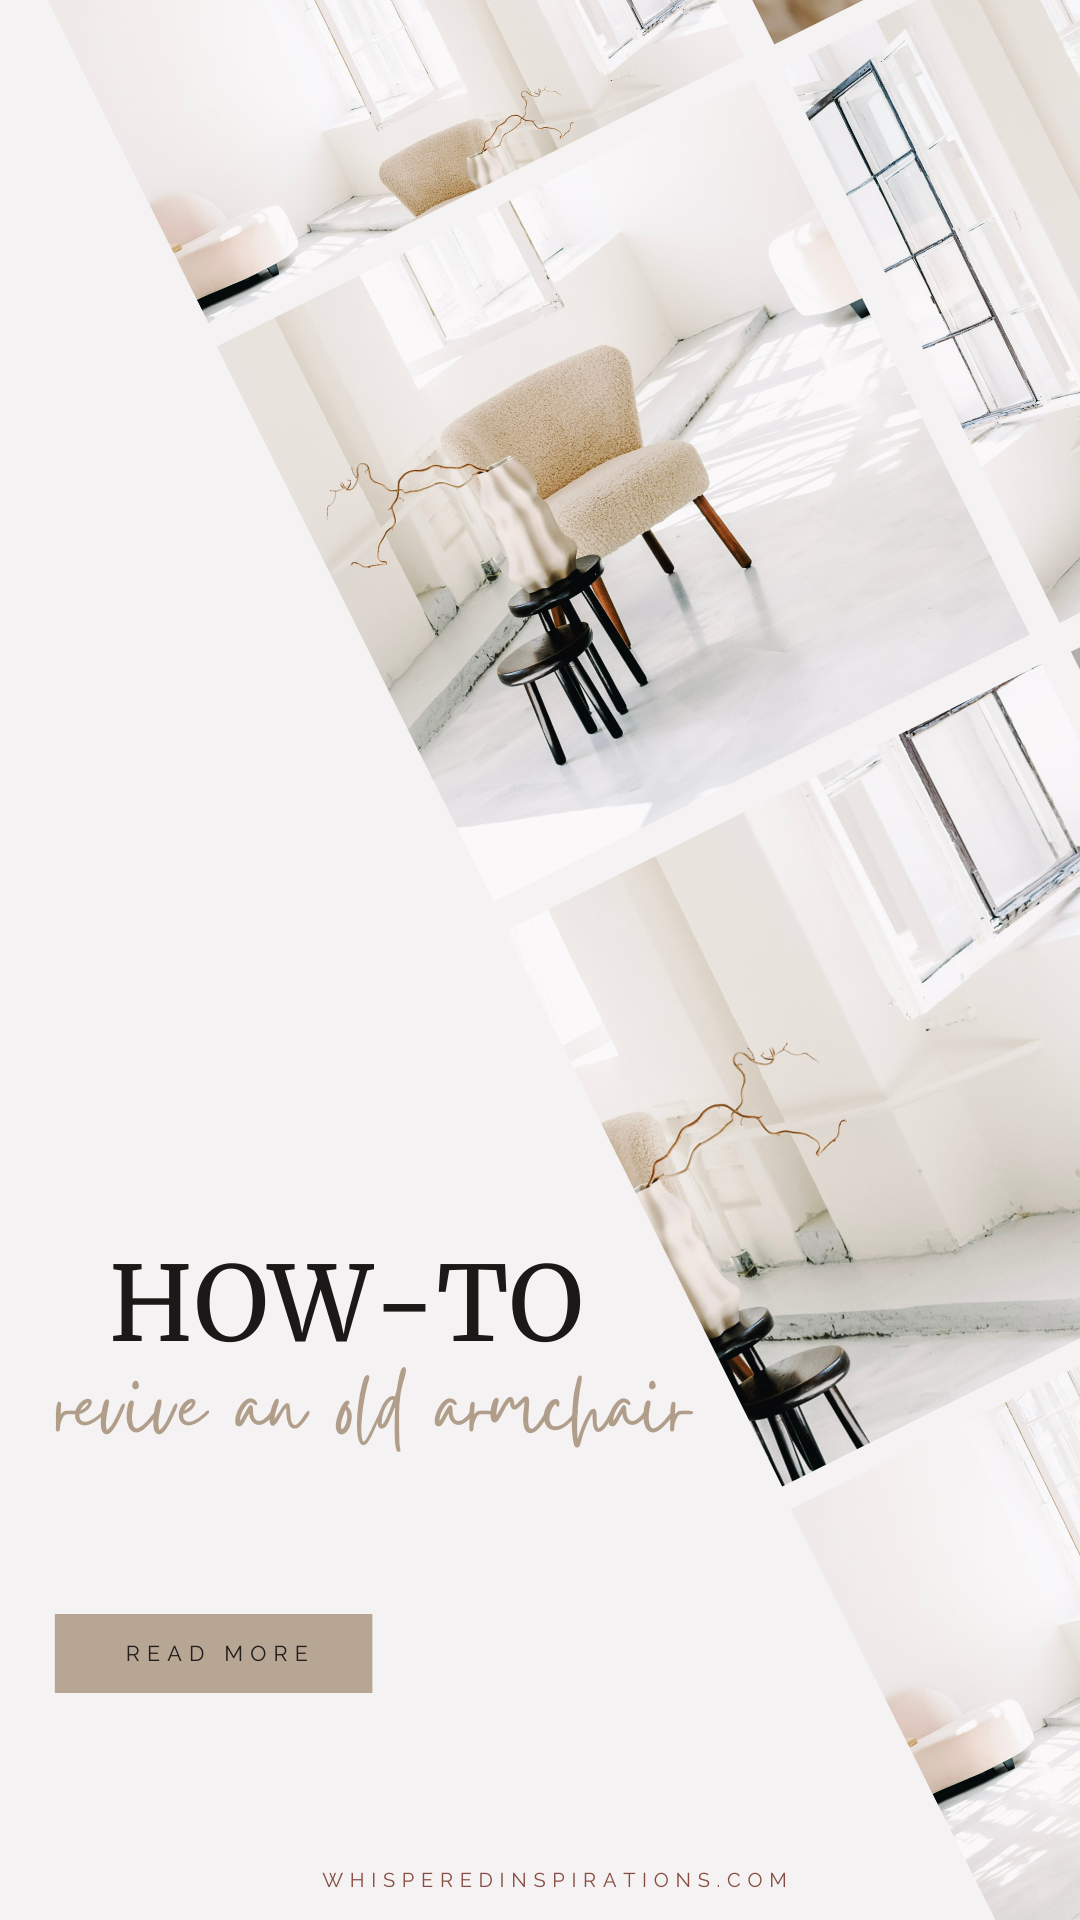 A beautiful white room has two wooden side tables with a vase. Behind it is an old arm chair and further back is a modern couch. This article covers tips on how to revive an old armchair.